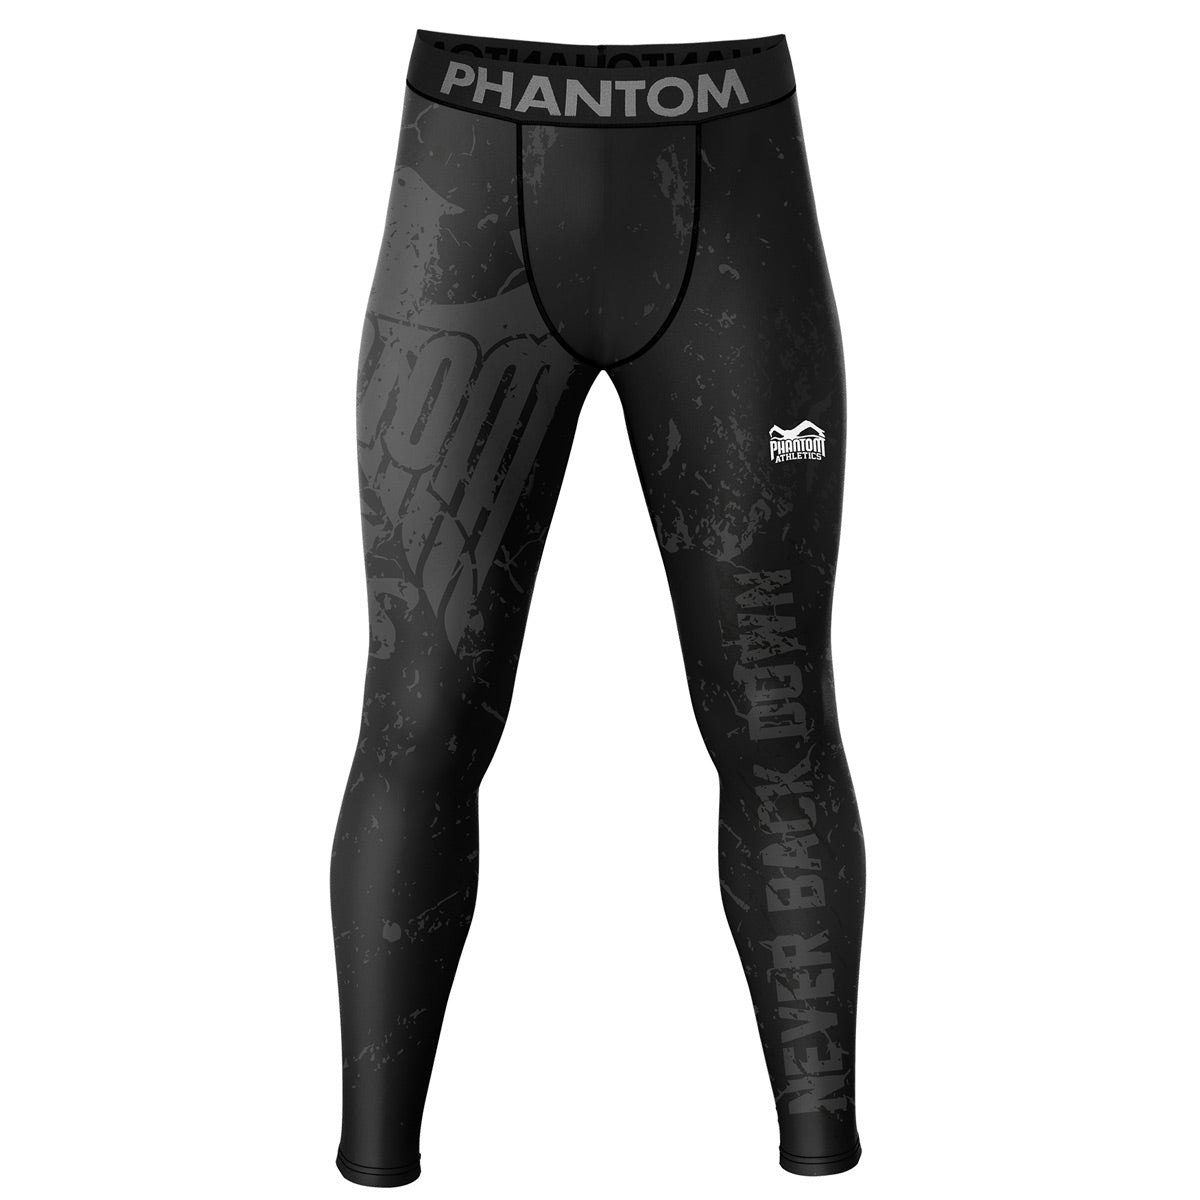 The Phantom EVO compression fight shorts in Team Germany design. With Germany eagle and "Never Back Down" lettering. Ideal for your combat sports, such as MMA, Muay Thai, wrestling, BJJ or kickboxing.